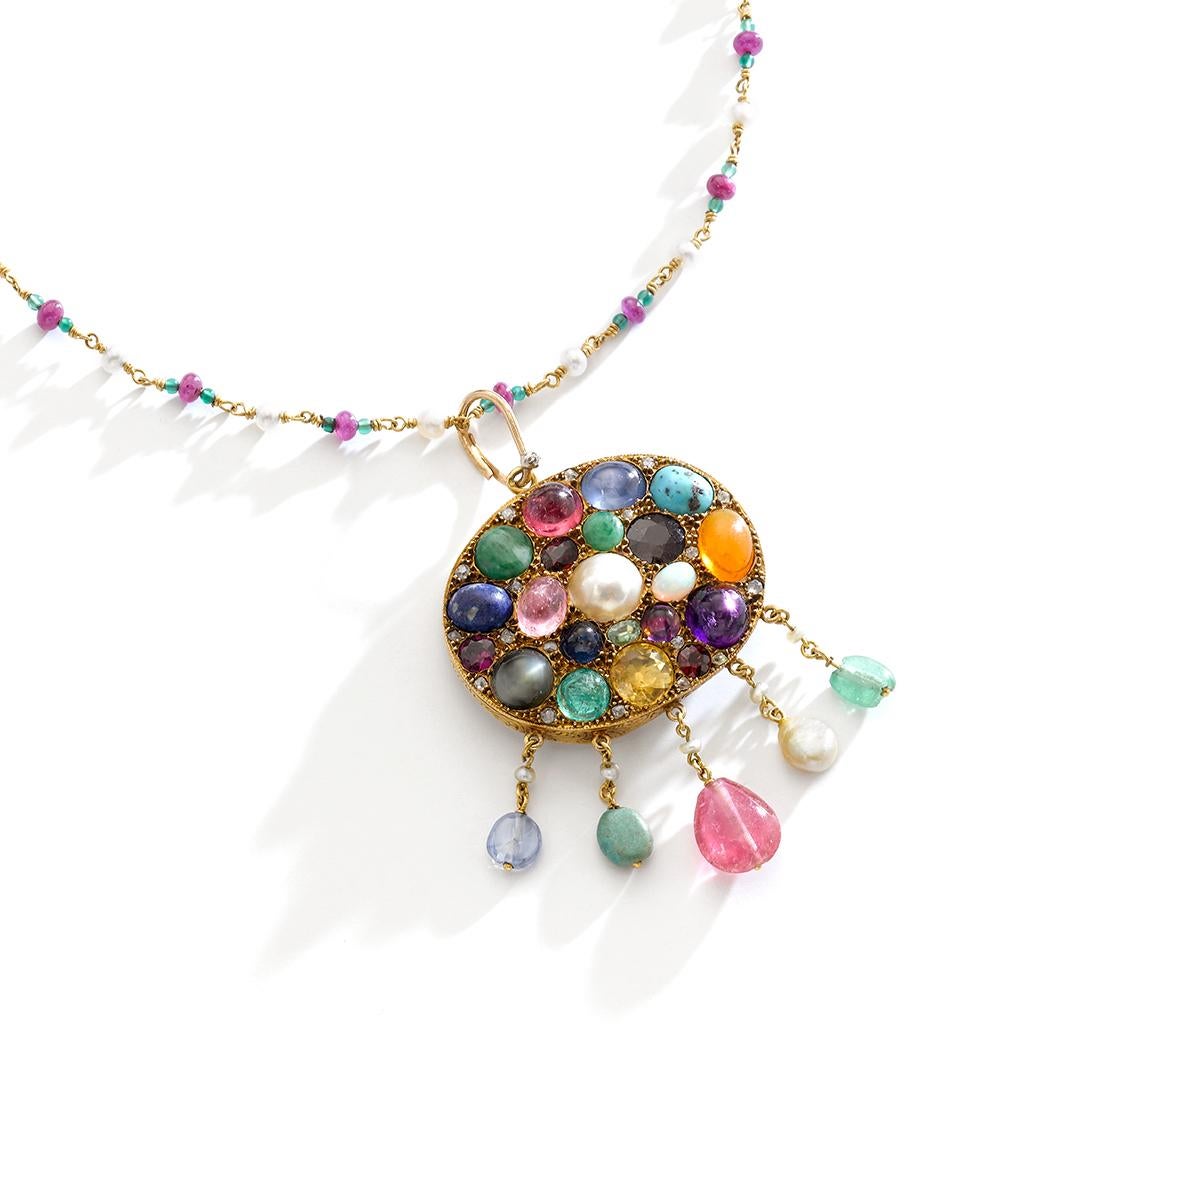 Multi Gems cabochon, Mother of Pearl and small diamond on Gold Pendant chain Necklace.
Emerald, Sapphire, Ruby, Turquoise Matrix, Amethyst, Pearl, Opal, Citrine, Peridot, Garnet, Diamond.
Mid 20th Century.

Size of the pendant:
Total height: 2.95